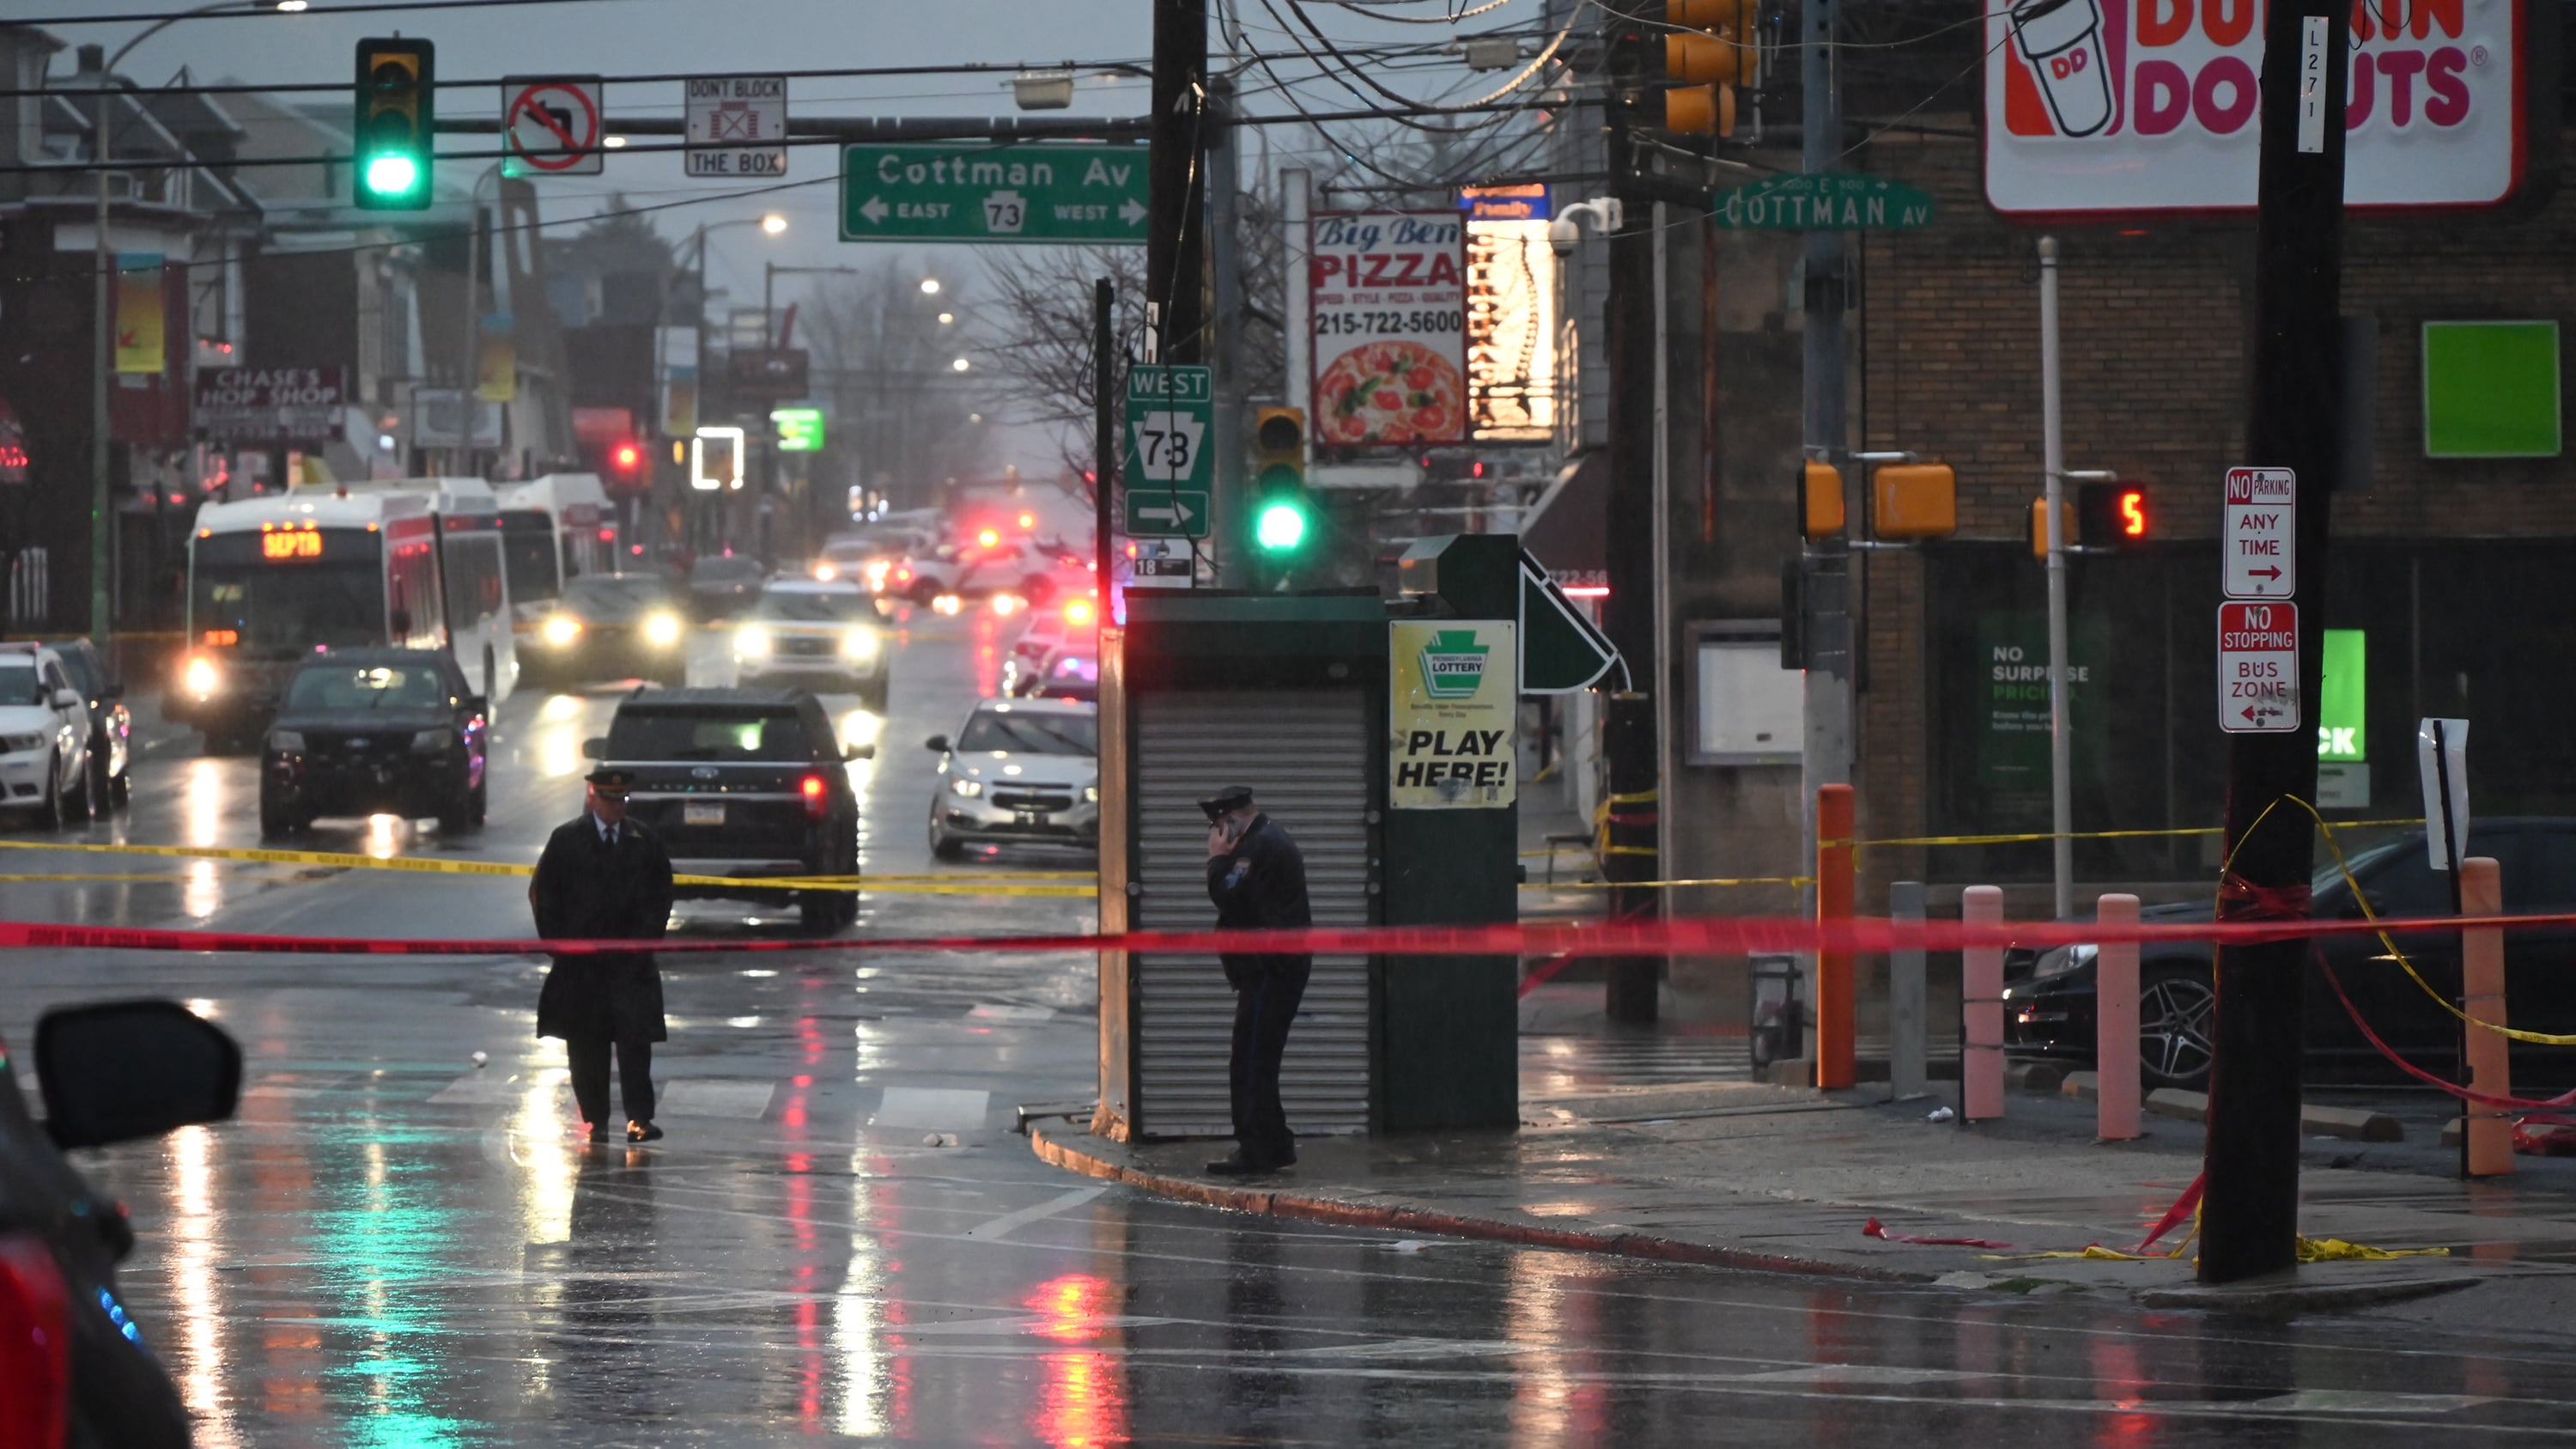 Two police officers stand on the sidewalk and in the street with a red caution tape across the street with cars in the background.